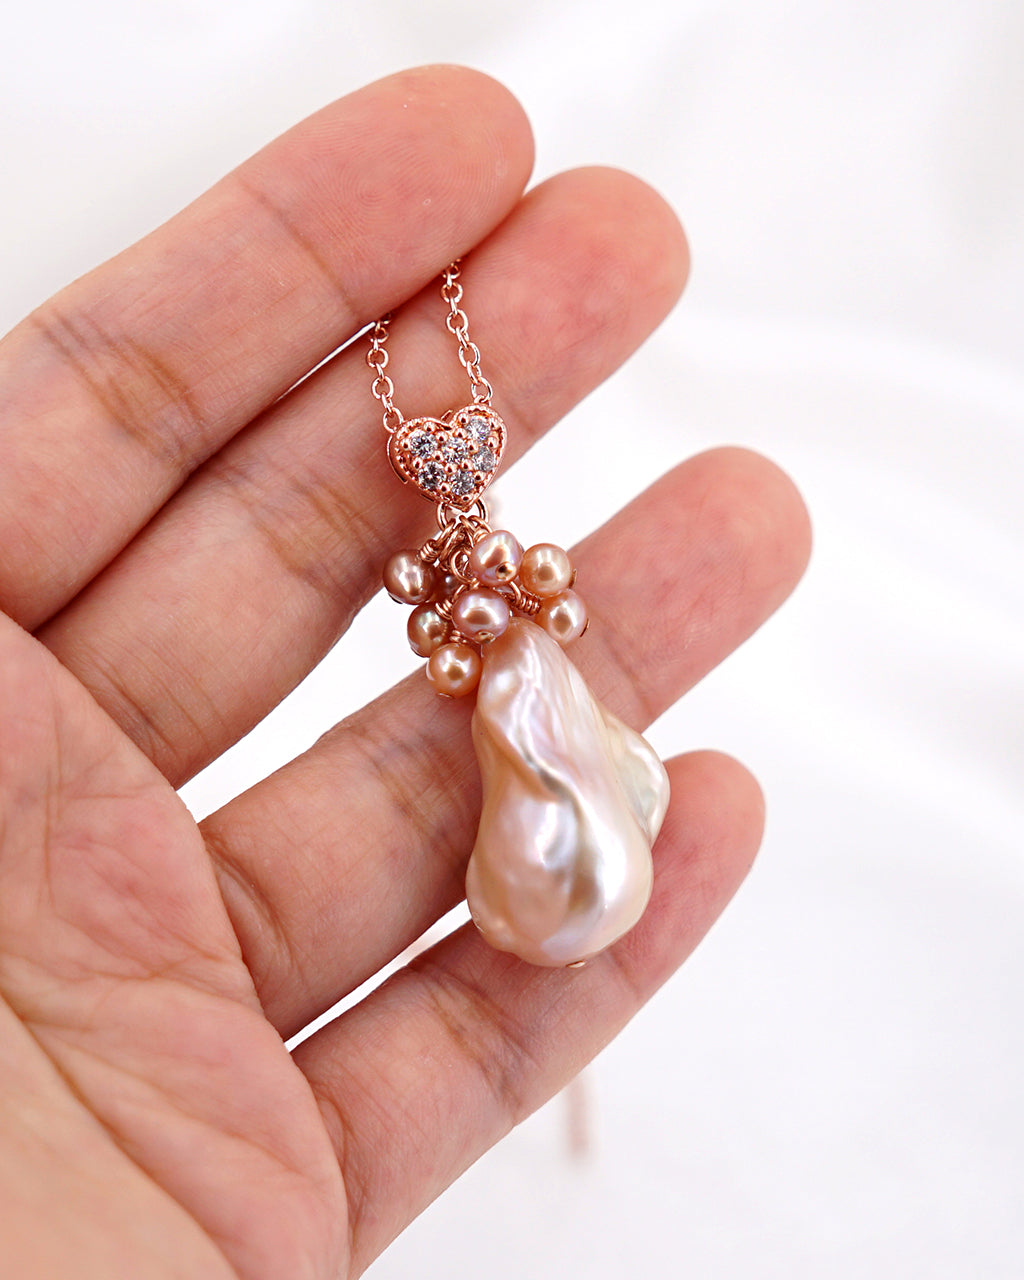 The pearl necklace a classic | order from Elli – Elli Jewelry